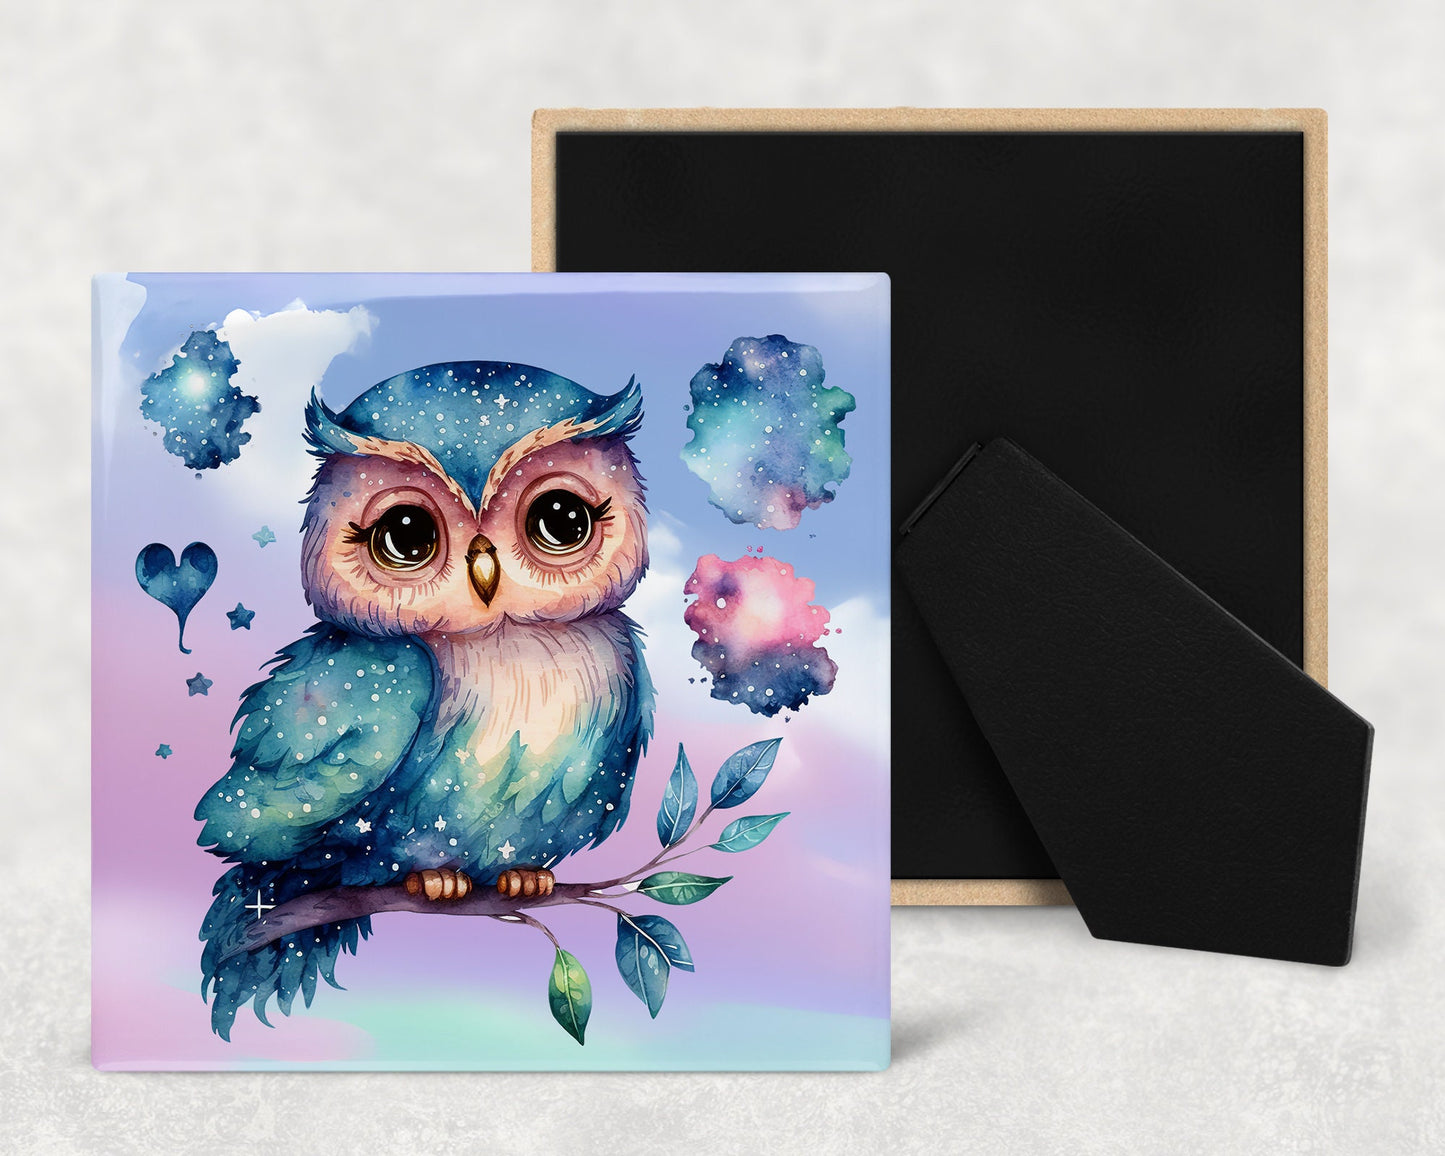 Cute Cartoon Owl Decorative Ceramic Tile Set with Optional Easel Back - Available in 4 sizes - Set of 4